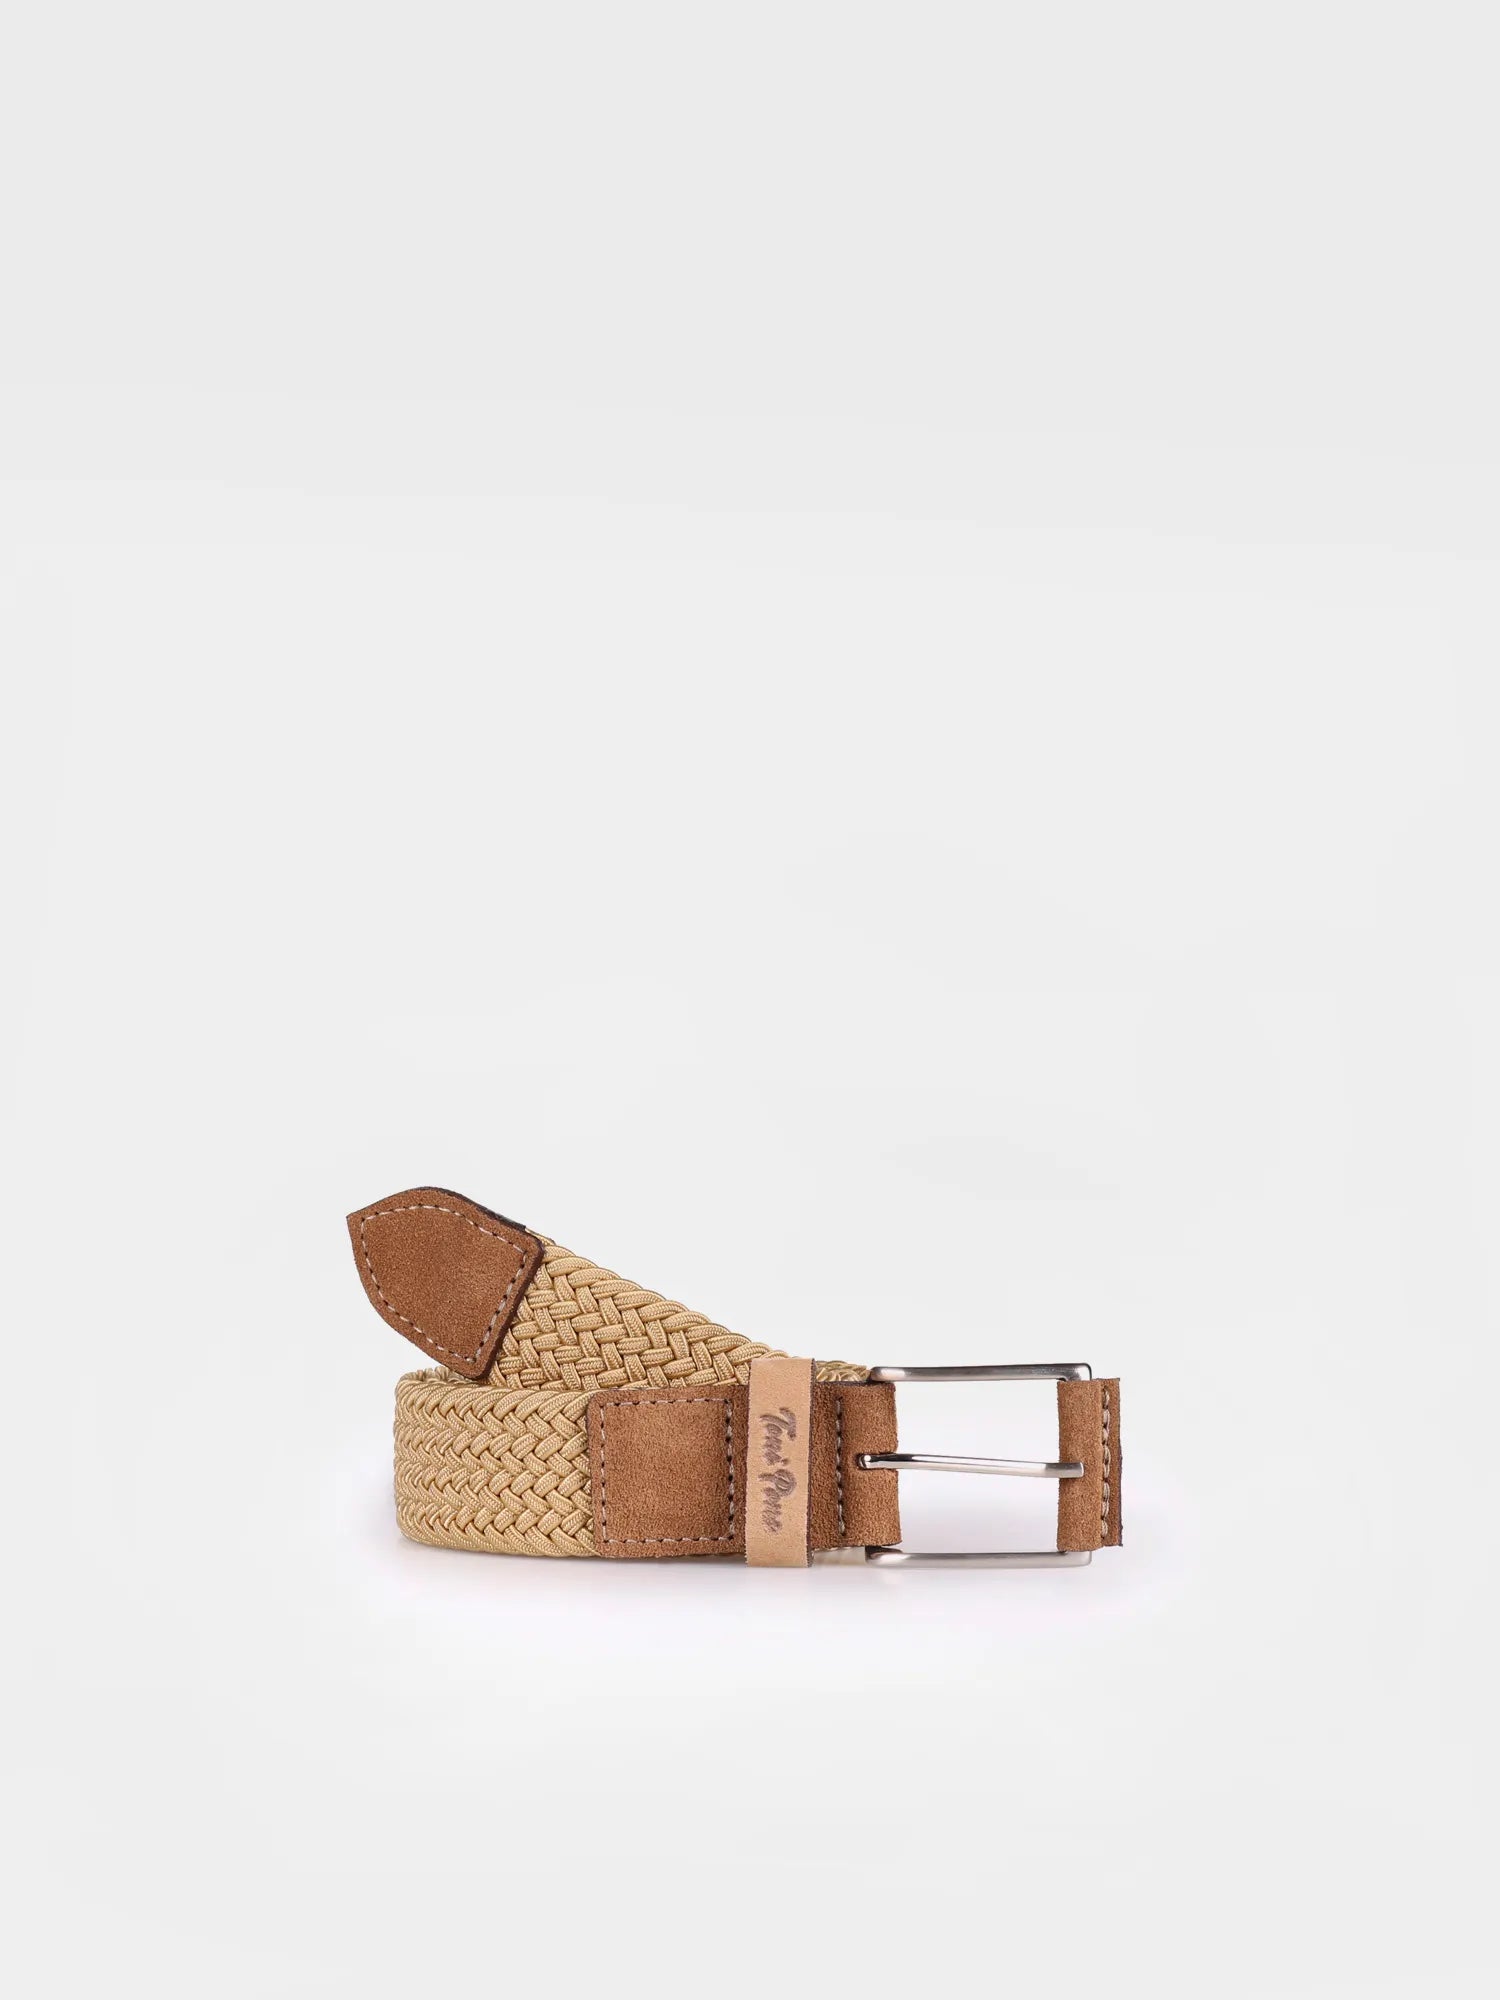 Men's fabric and leather belt - ERIC